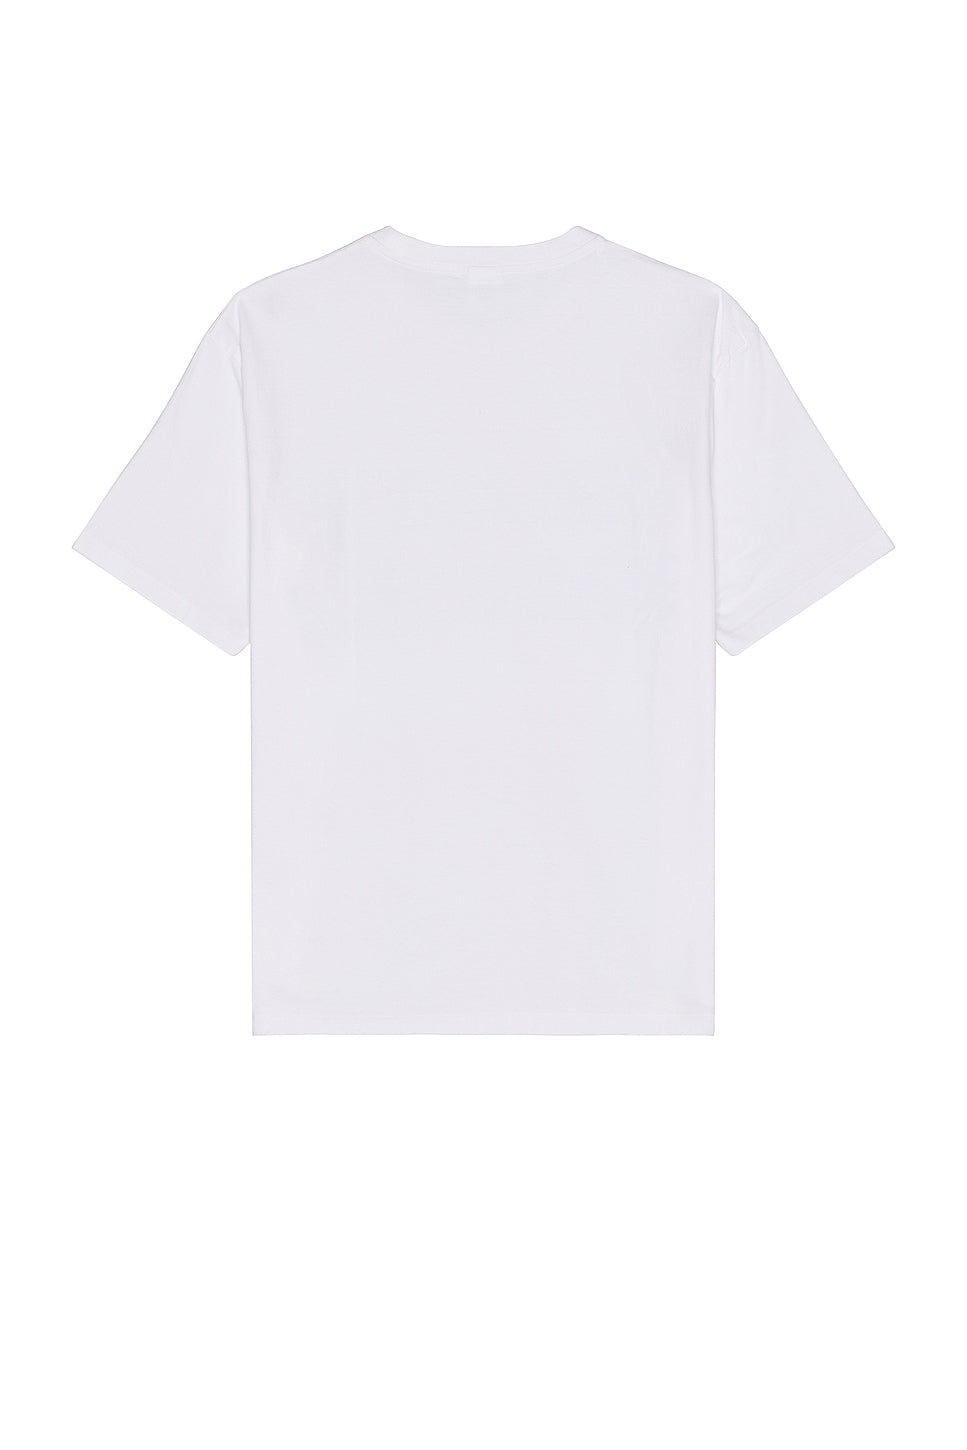 Washed Heavy Weight Crew Neck T-Shirt